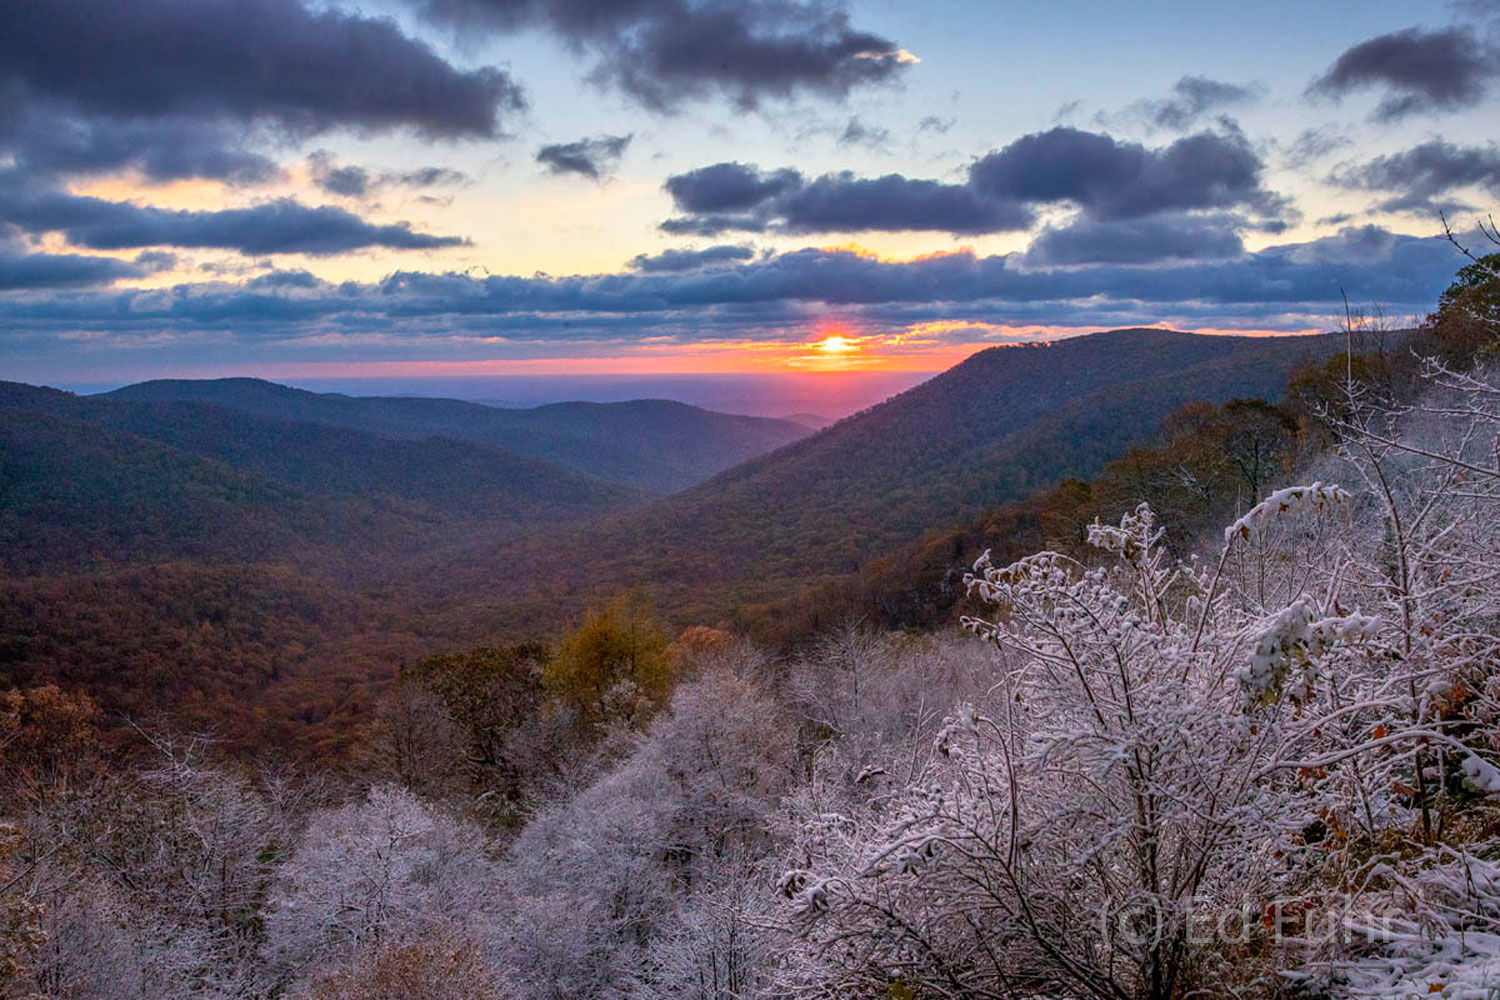 Tunnel View Overlook provides one of the best views of the Blue Ridge mountains at sunrise, highlighted here by a light snow.